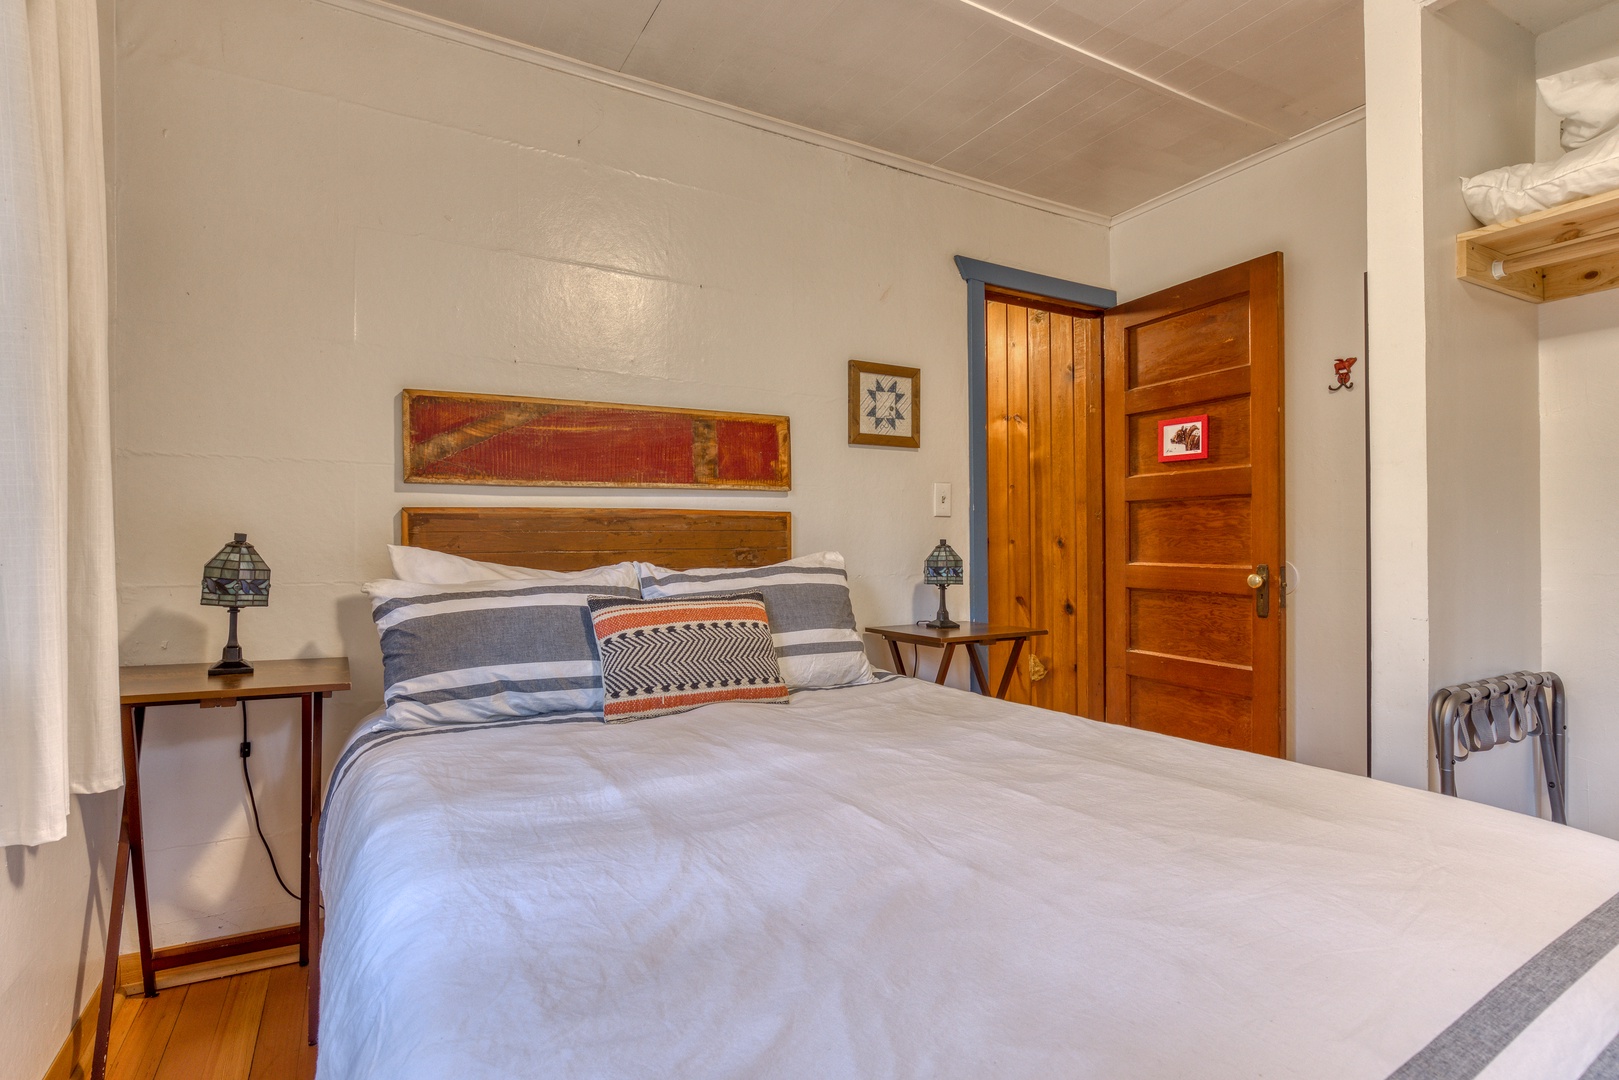 Brightwood Vacation Rentals, Springbrook Cabin - Beautiful primary bedroom with queen bed and view of the forest